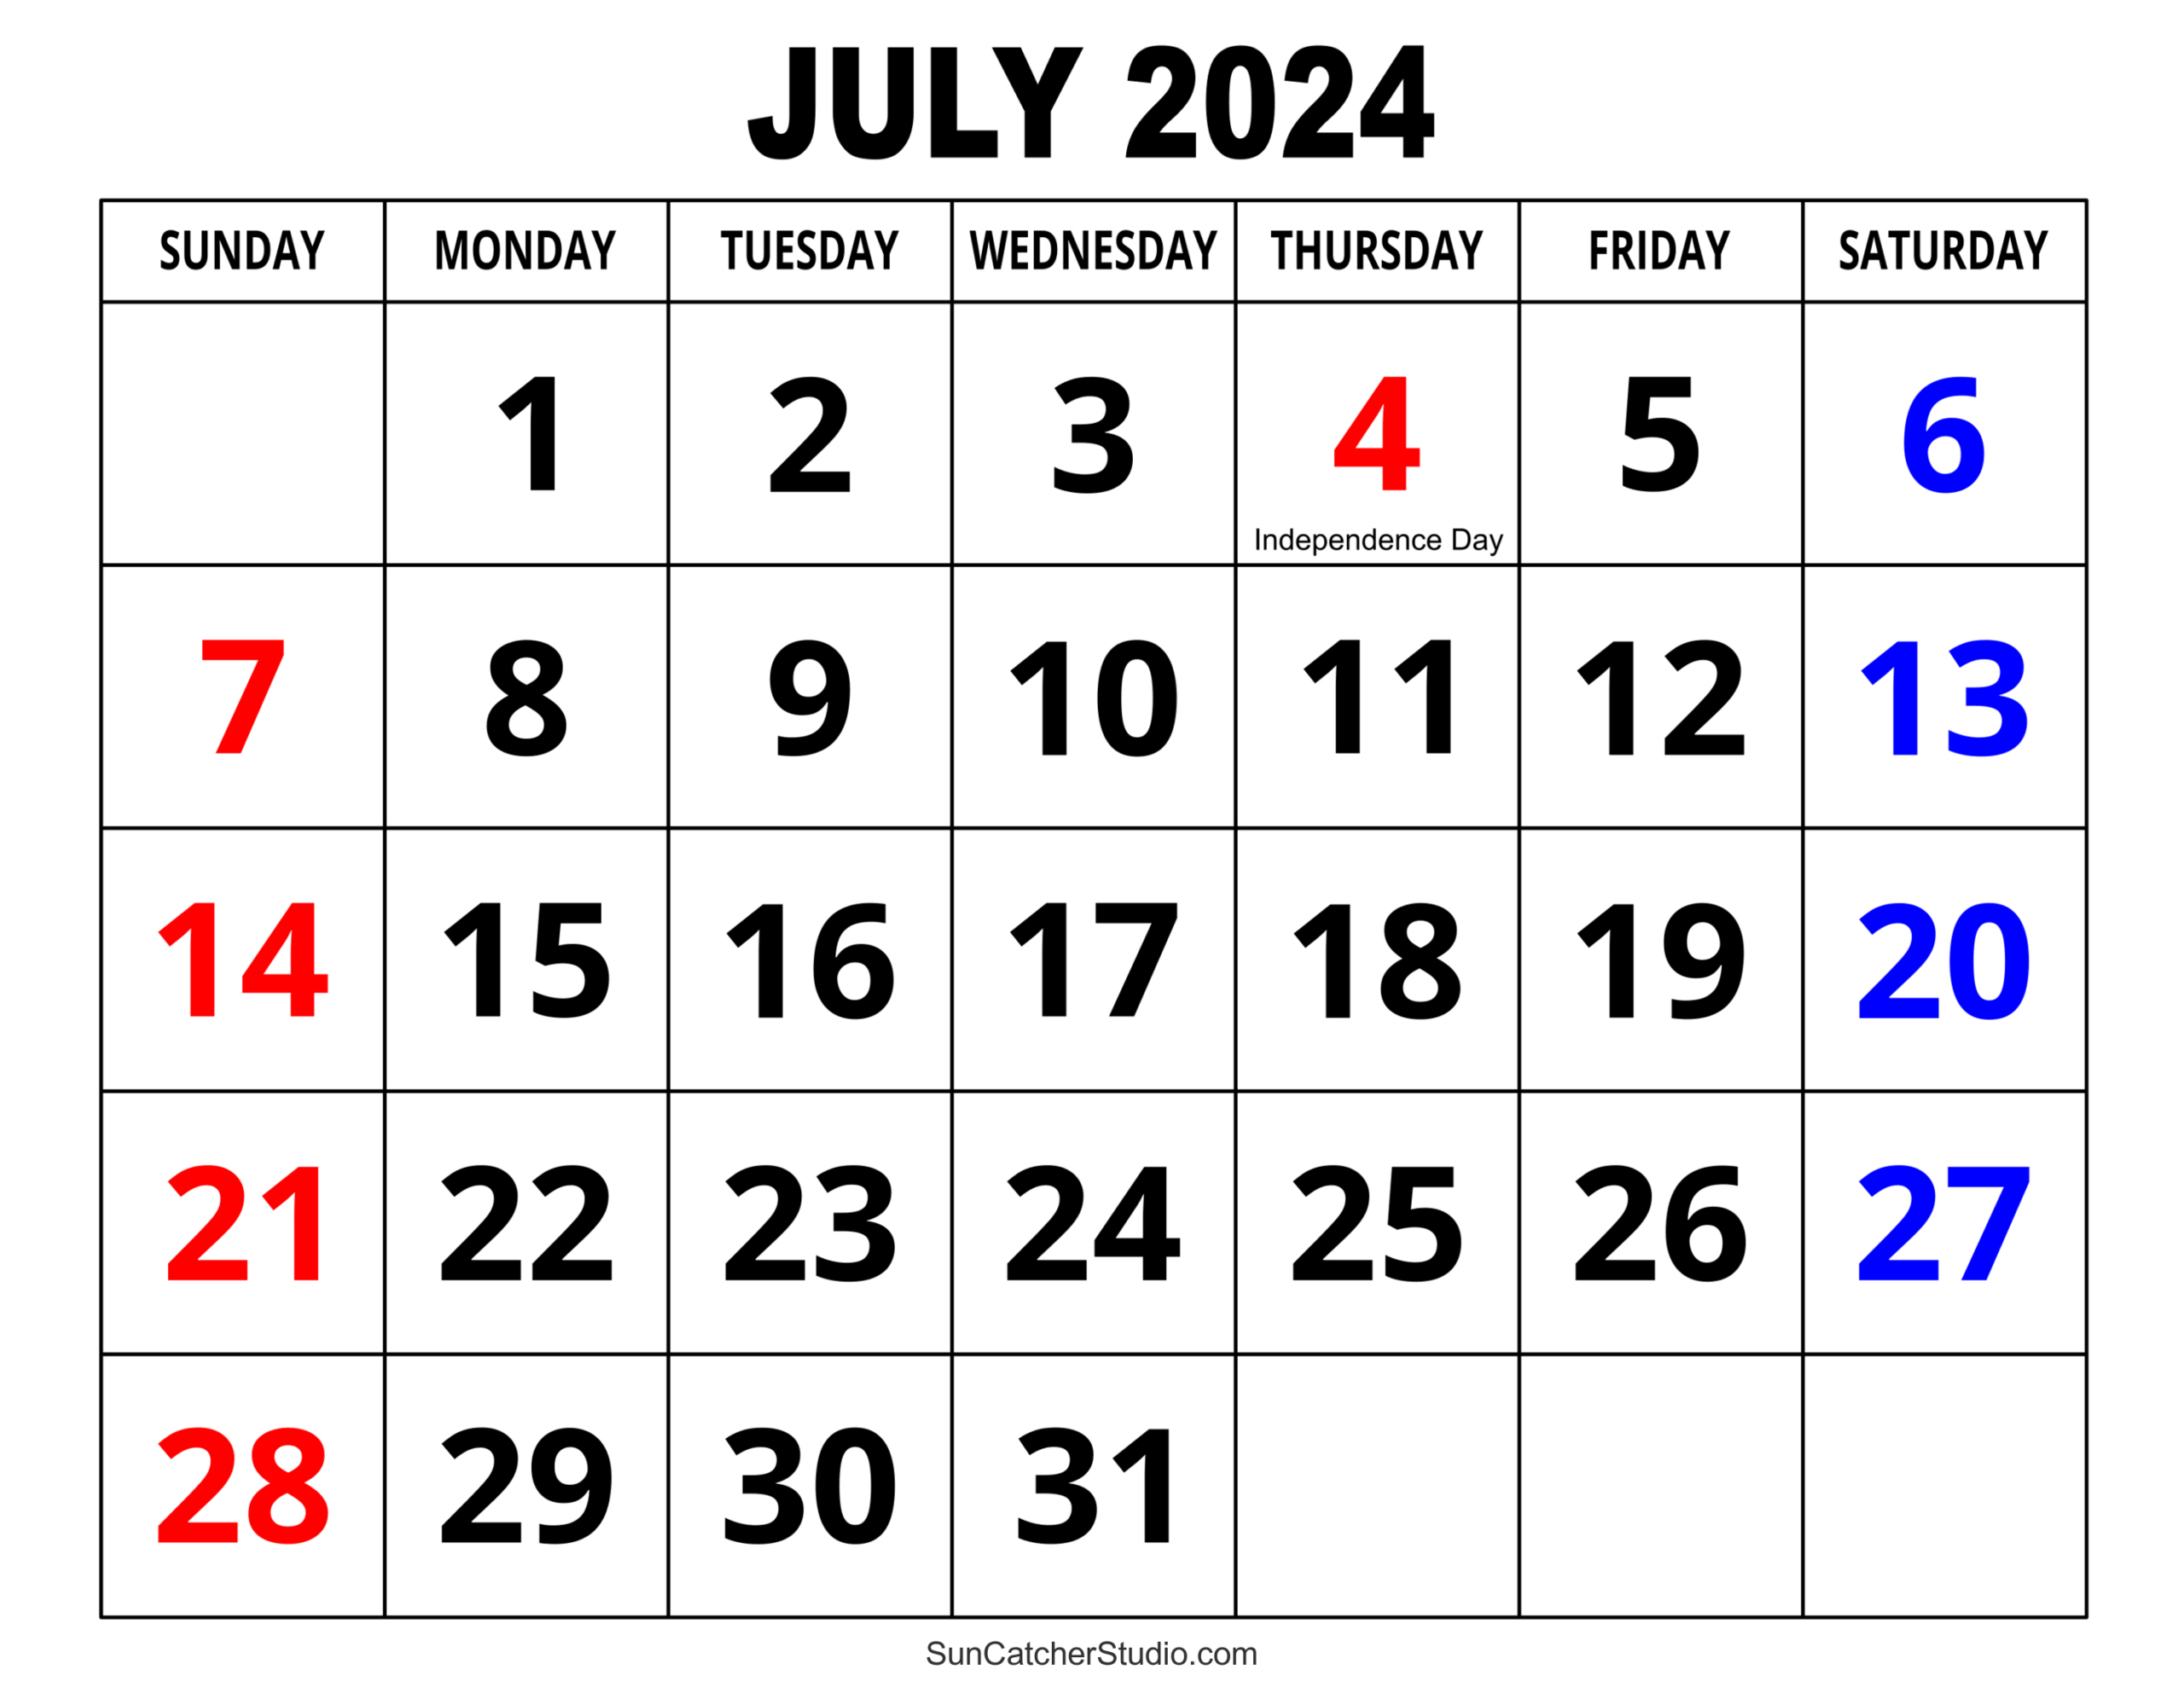 July 2024 Calendar (Free Printable) – Diy Projects, Patterns | 9 July 2024 Calendar Printable